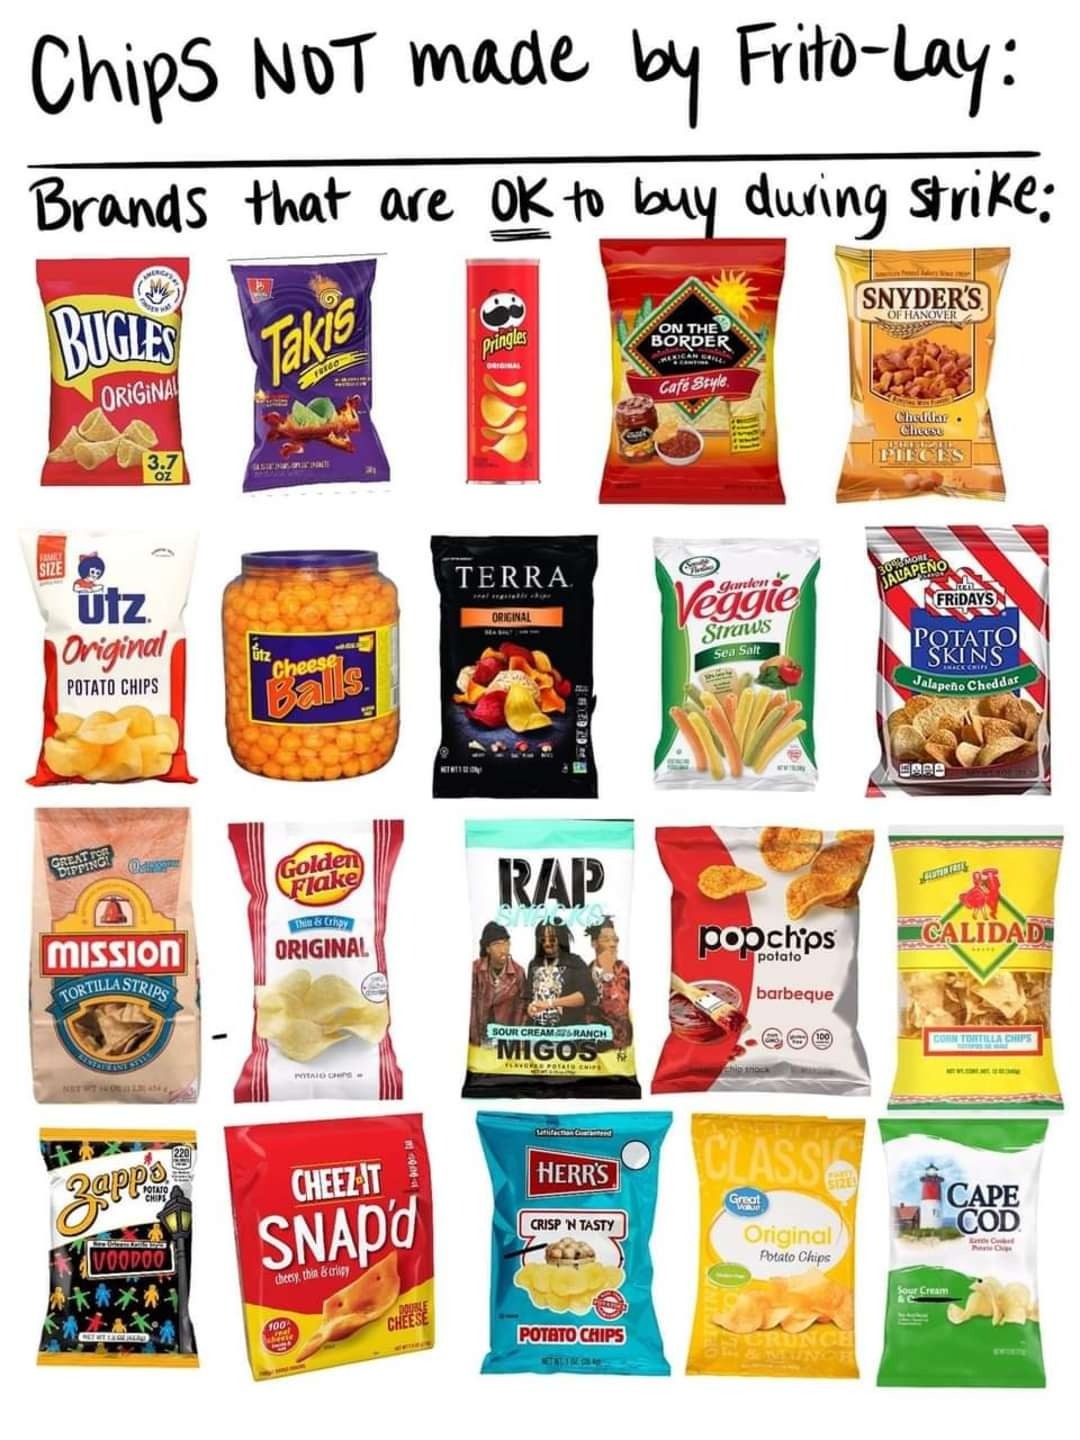 luxflora:jenniferrpovey:So, this hasn’t crossed my dash yet. (Not blaming anyone, there is soooo much going on in the world and I’d also missed it in the noise).There is currently a strike at Frito-Lay. in Topeka. These workers are striking